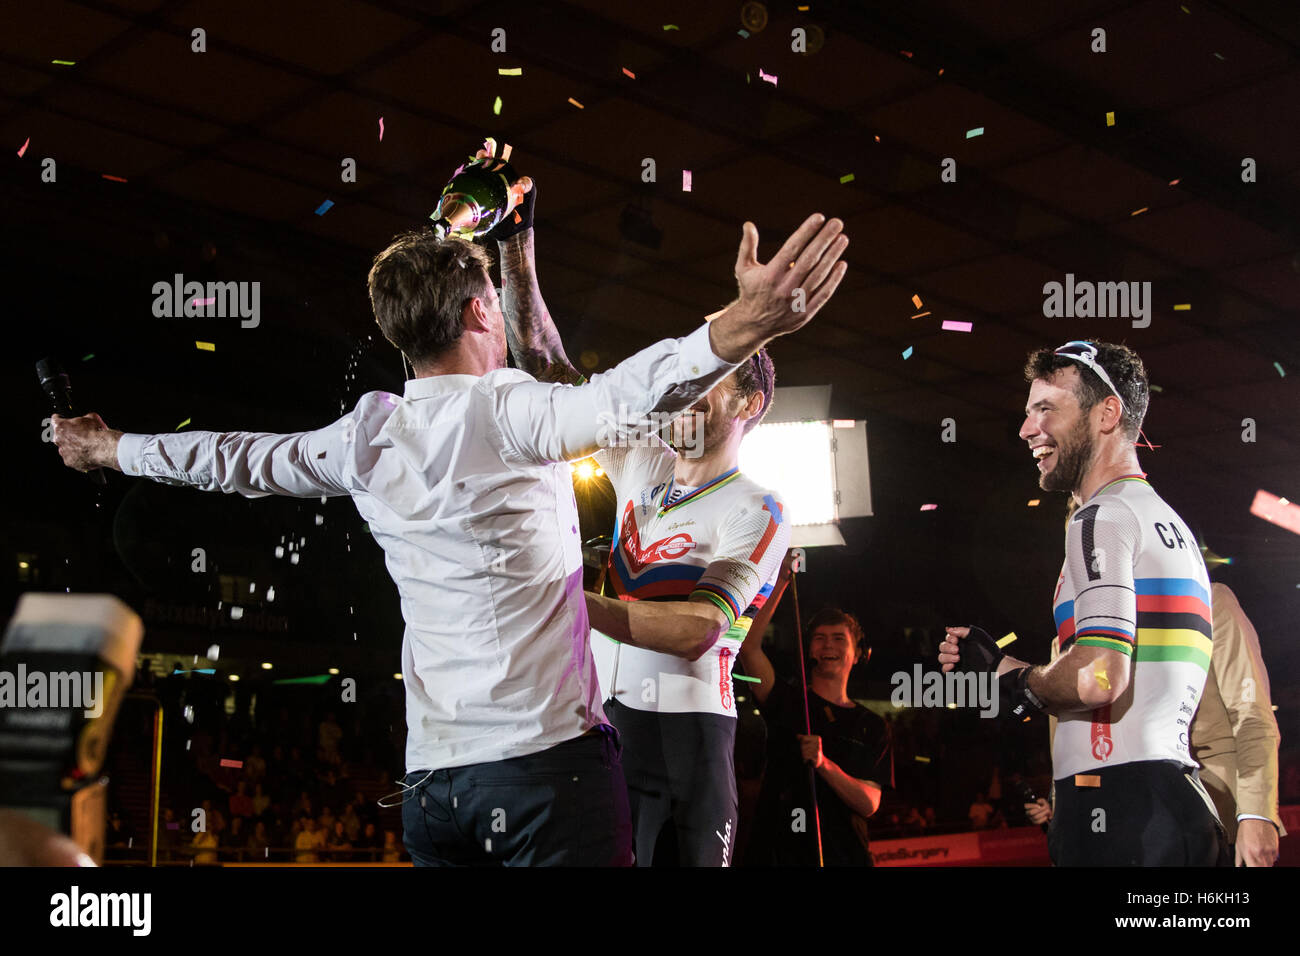 London, UK  30th October, 2016.   Cyclists compete  in the final day of  the London Six Day cycling event.  Bradley Wiggins and Mark Cavendish finish second. Bradley Wiggins pours champagne over the presenter. Lee Valley Velodrome, Olympic Park, London, UK. Copyright Carol Moir/Alamy Live News. Stock Photo